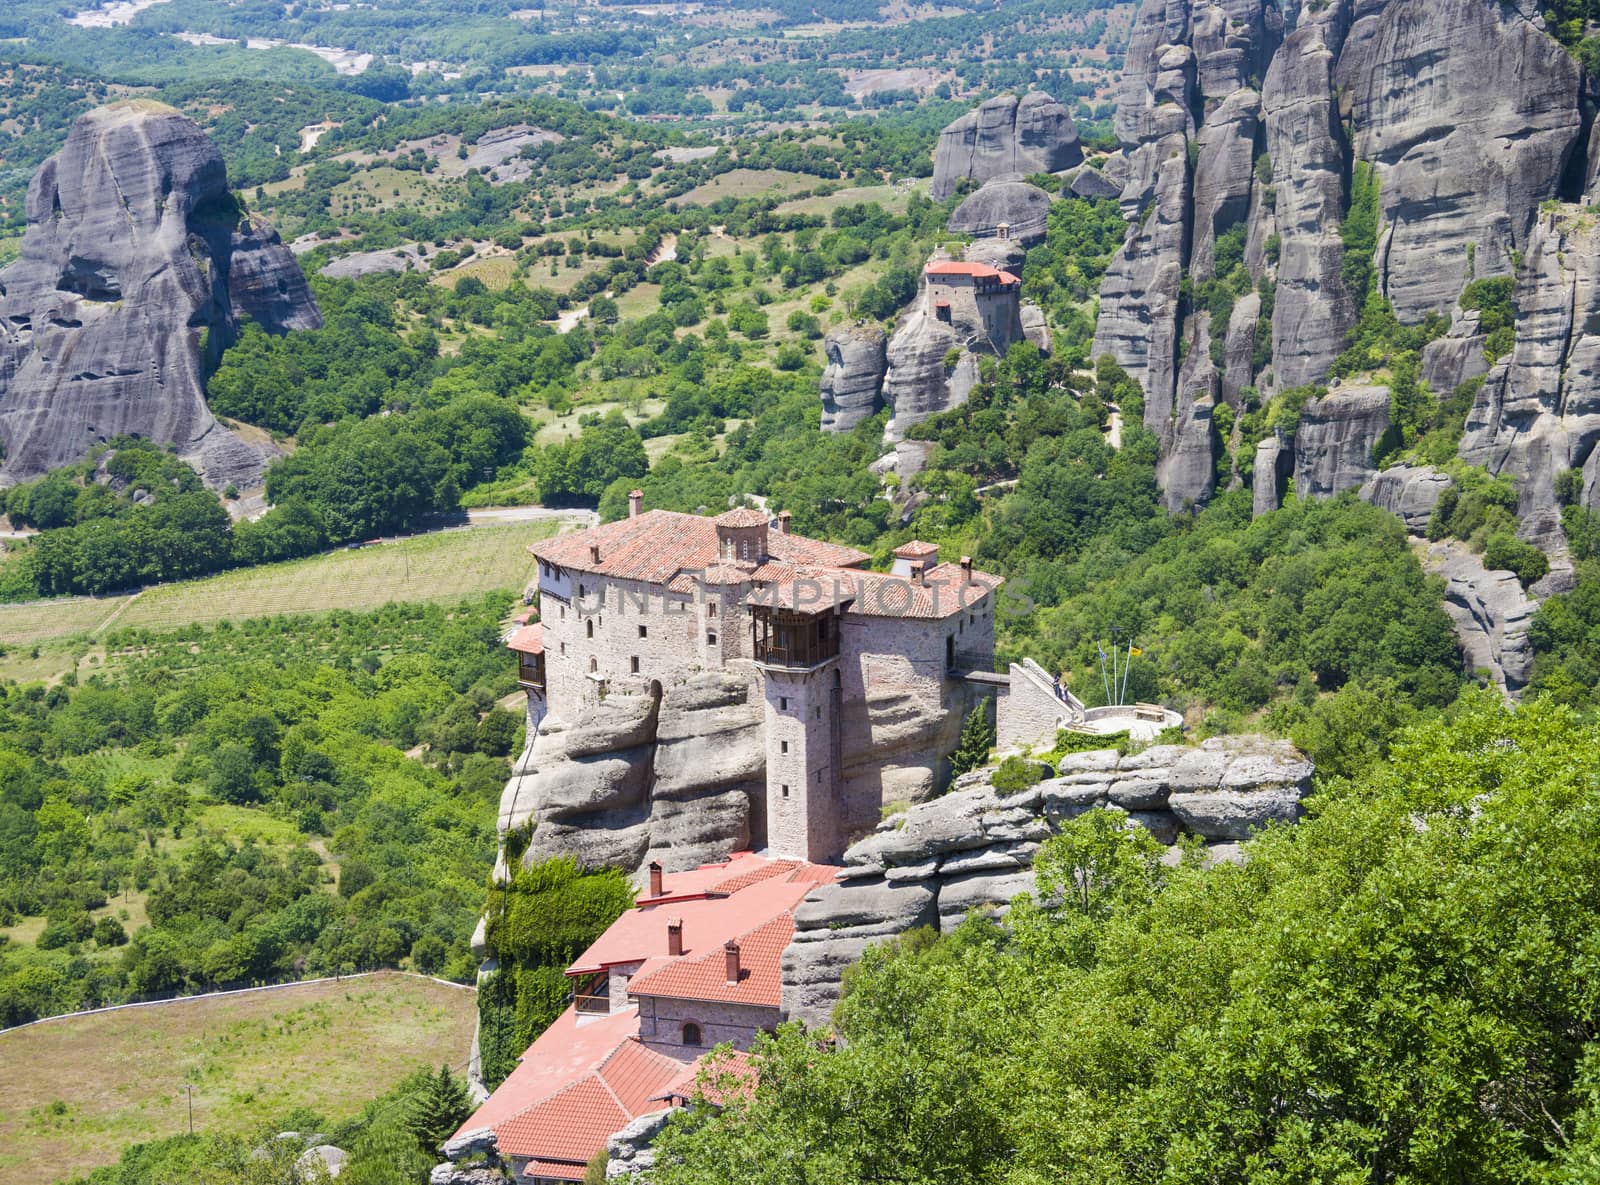 view of the ancient Greek monasteries located in the mountains